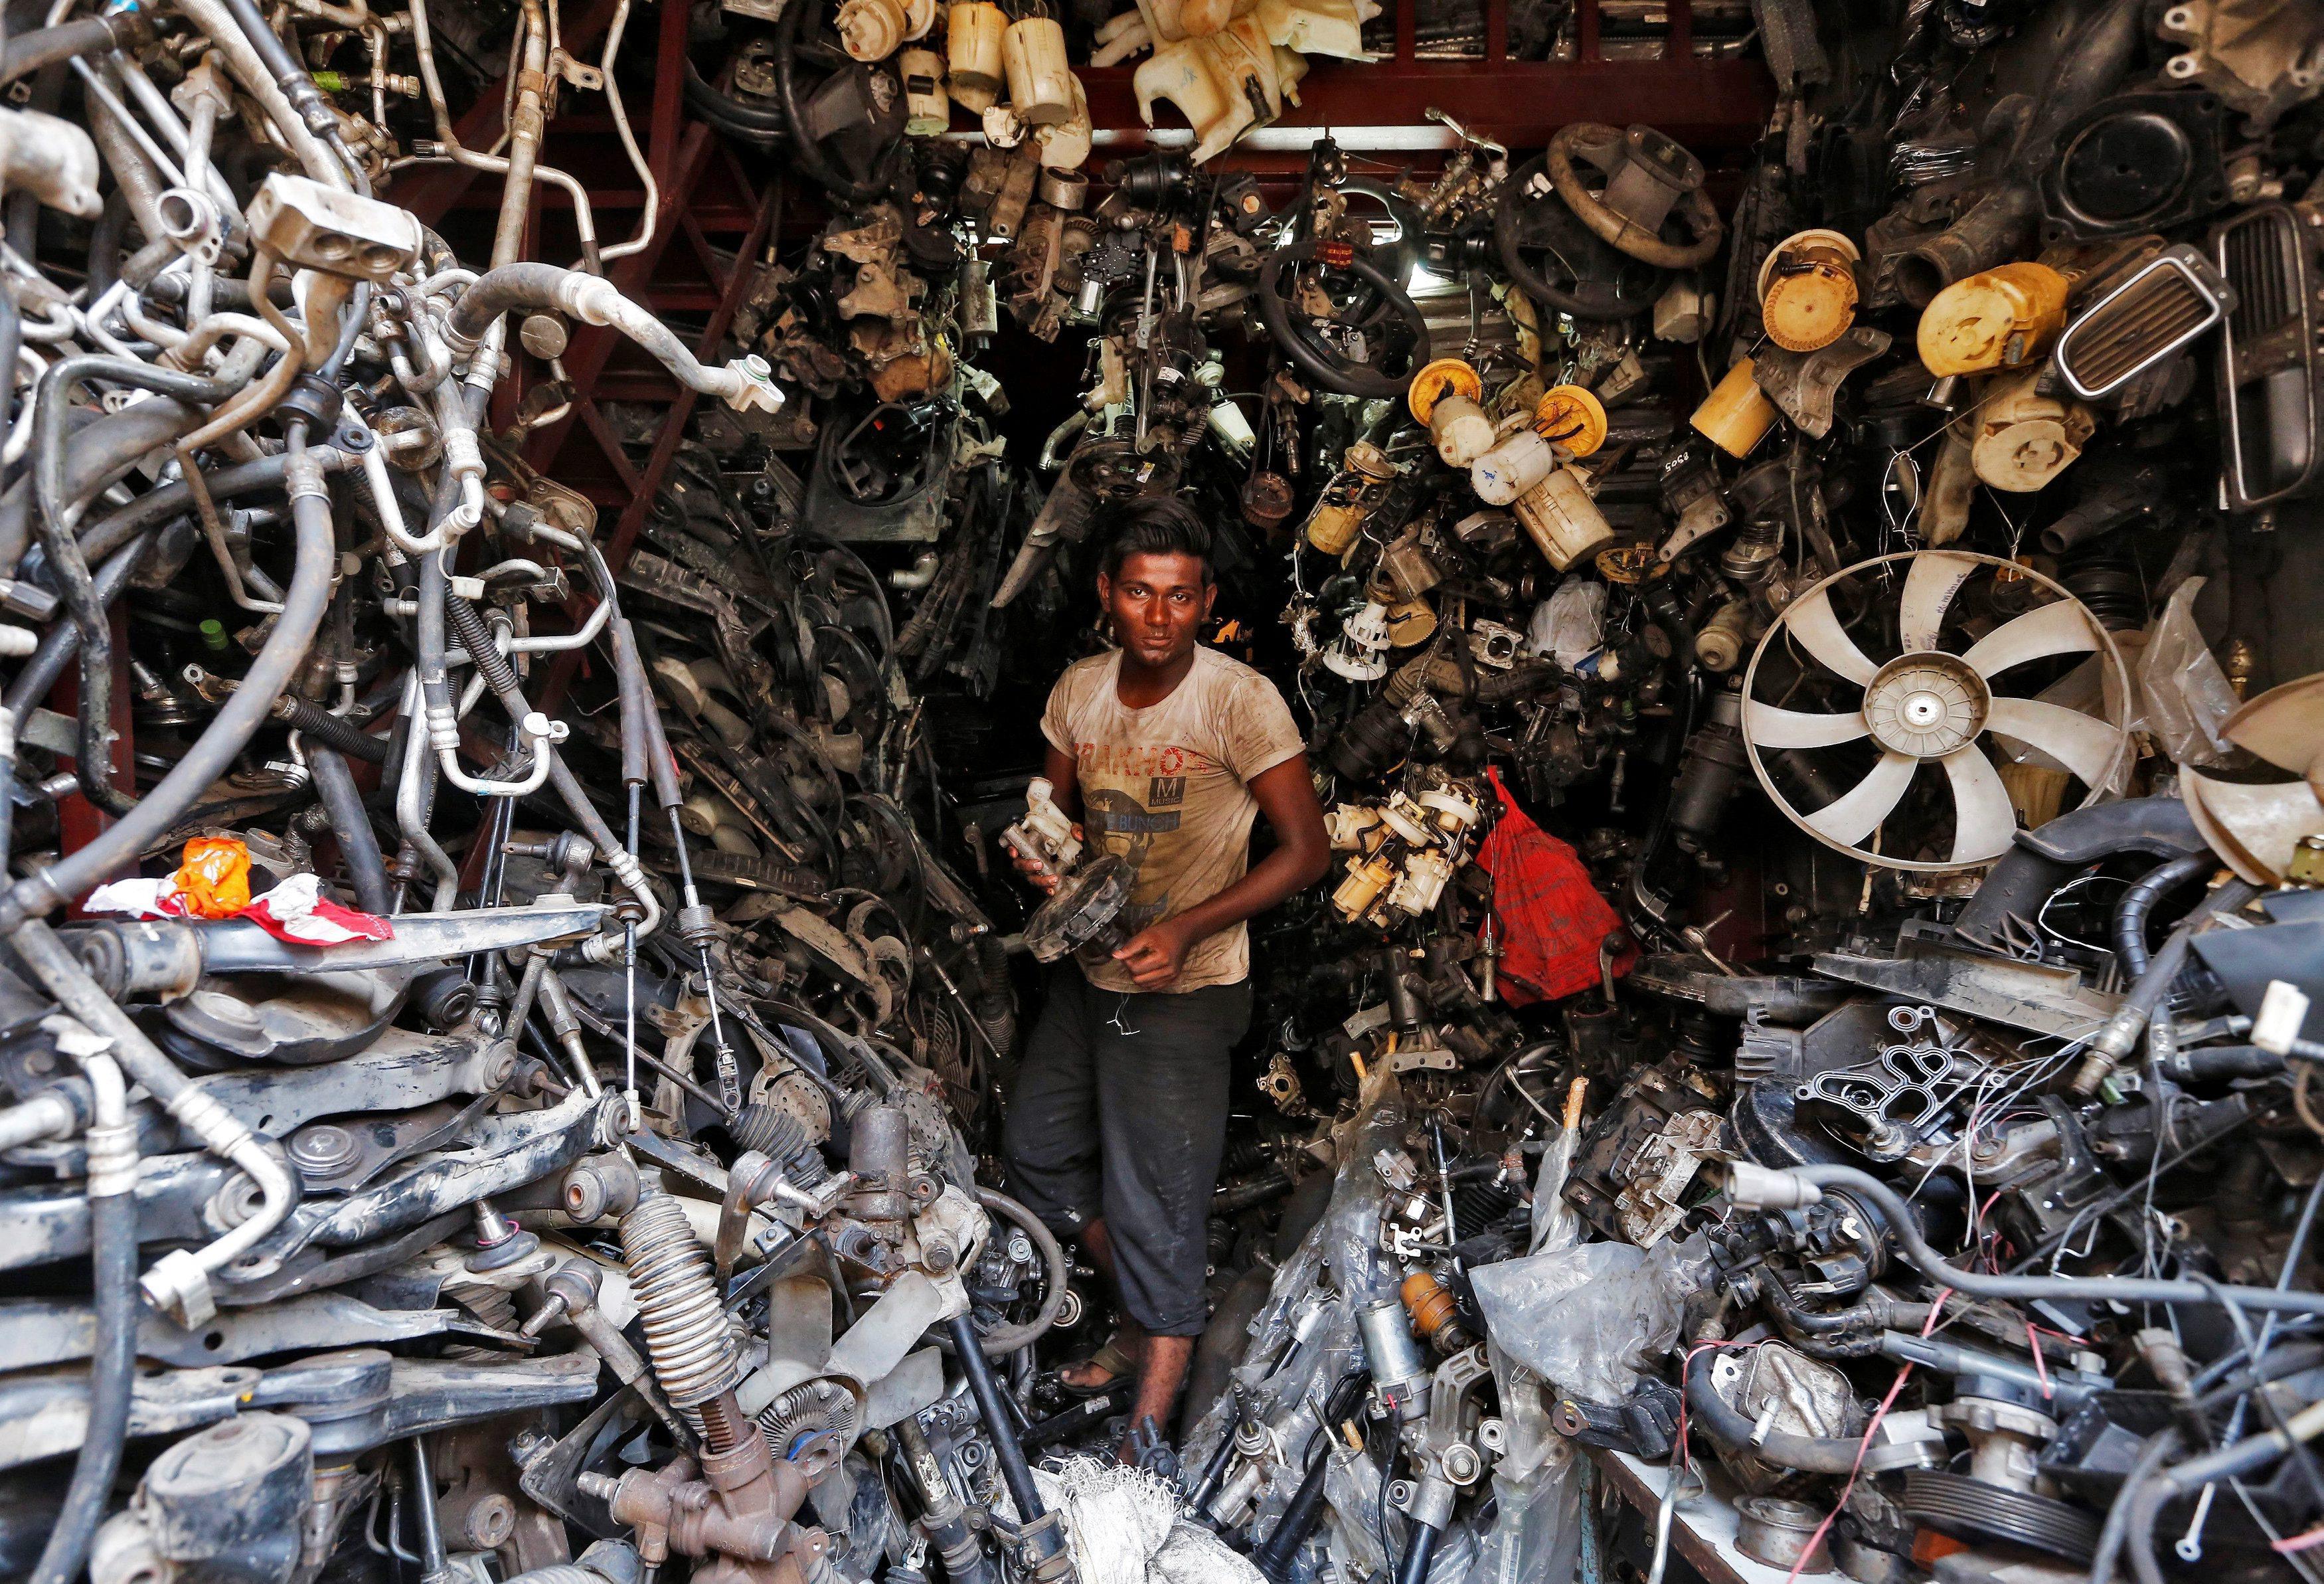 A worker carries a part of a used car inside a shop at a second-hand automobile parts market in Mumb